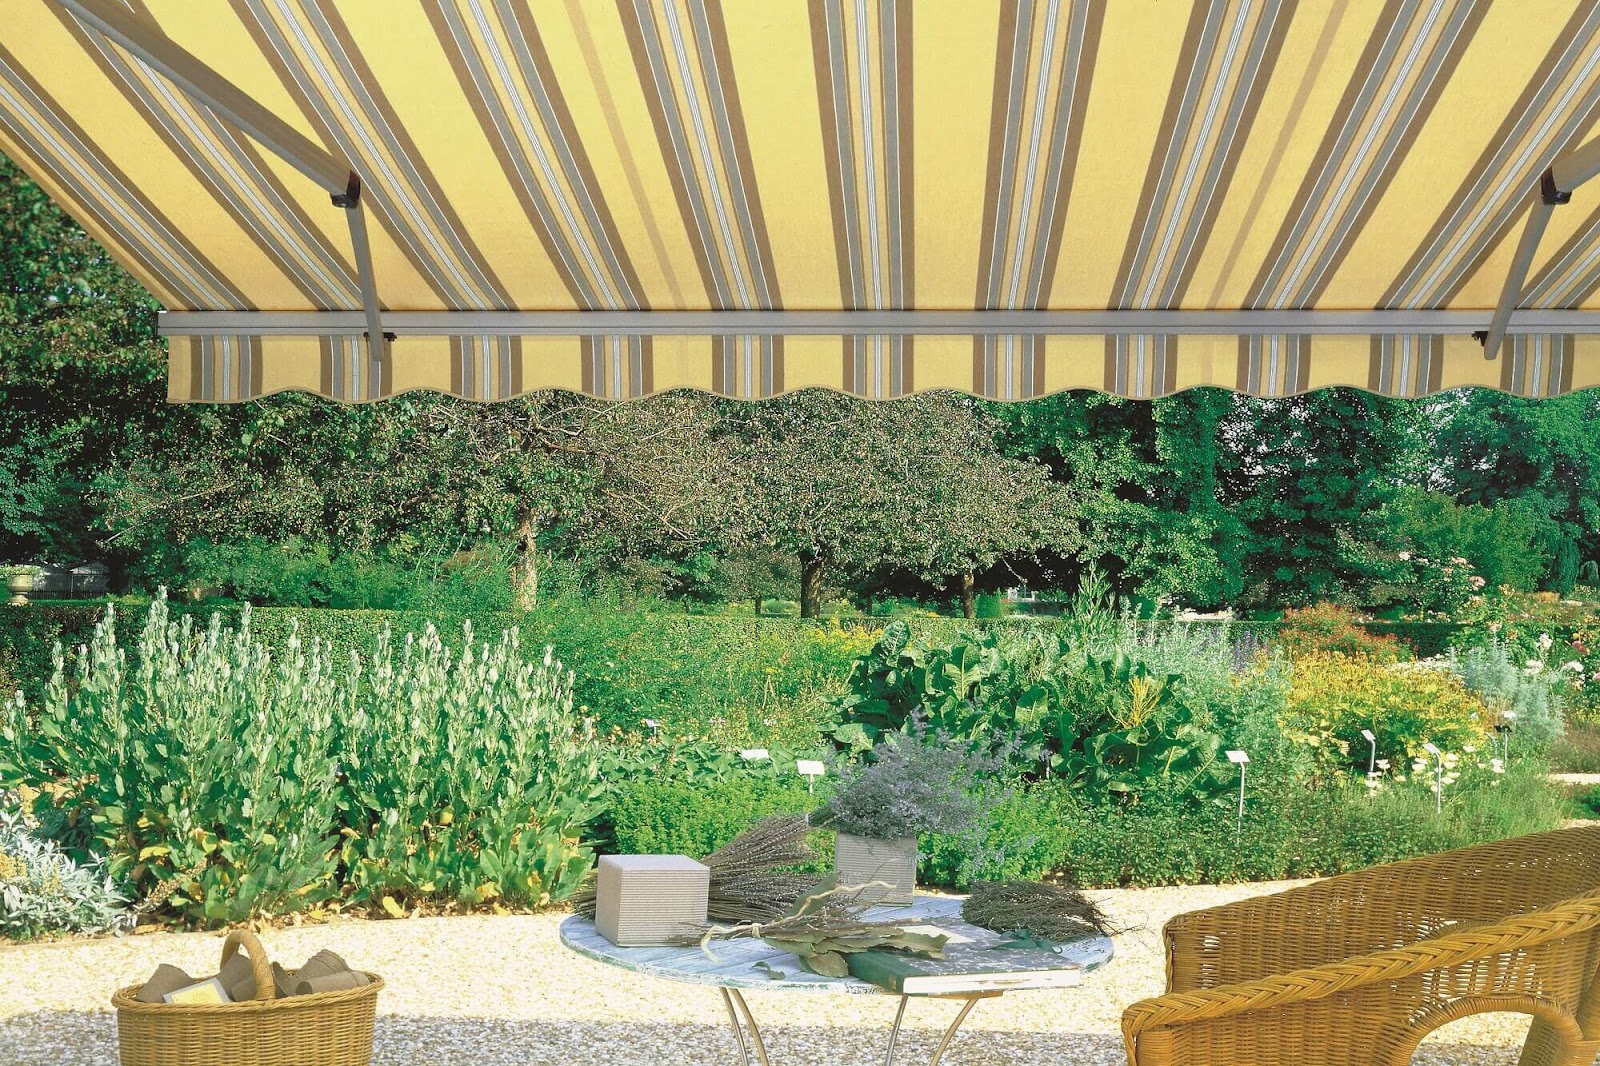 Striped retractable folding arm awning in a garden